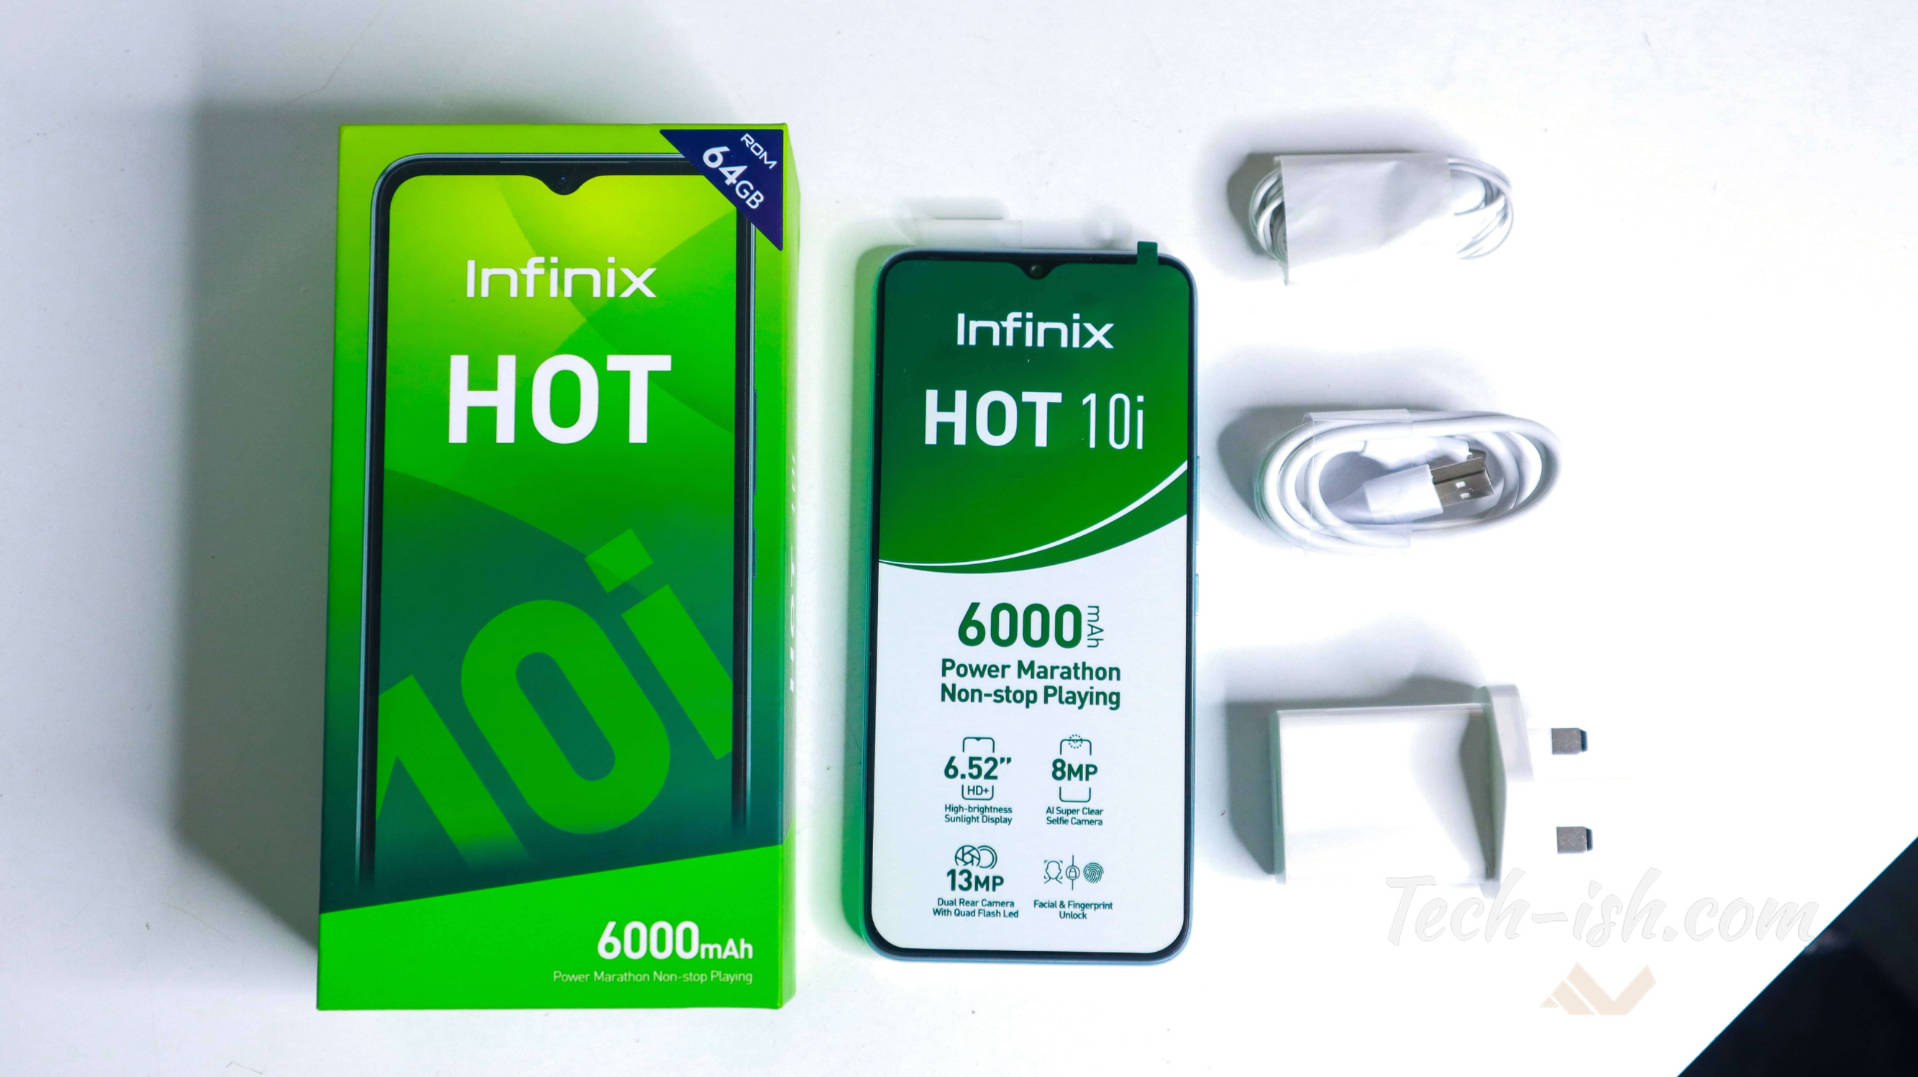 Infinix HOT 10i Android Go Phone Officially Launched